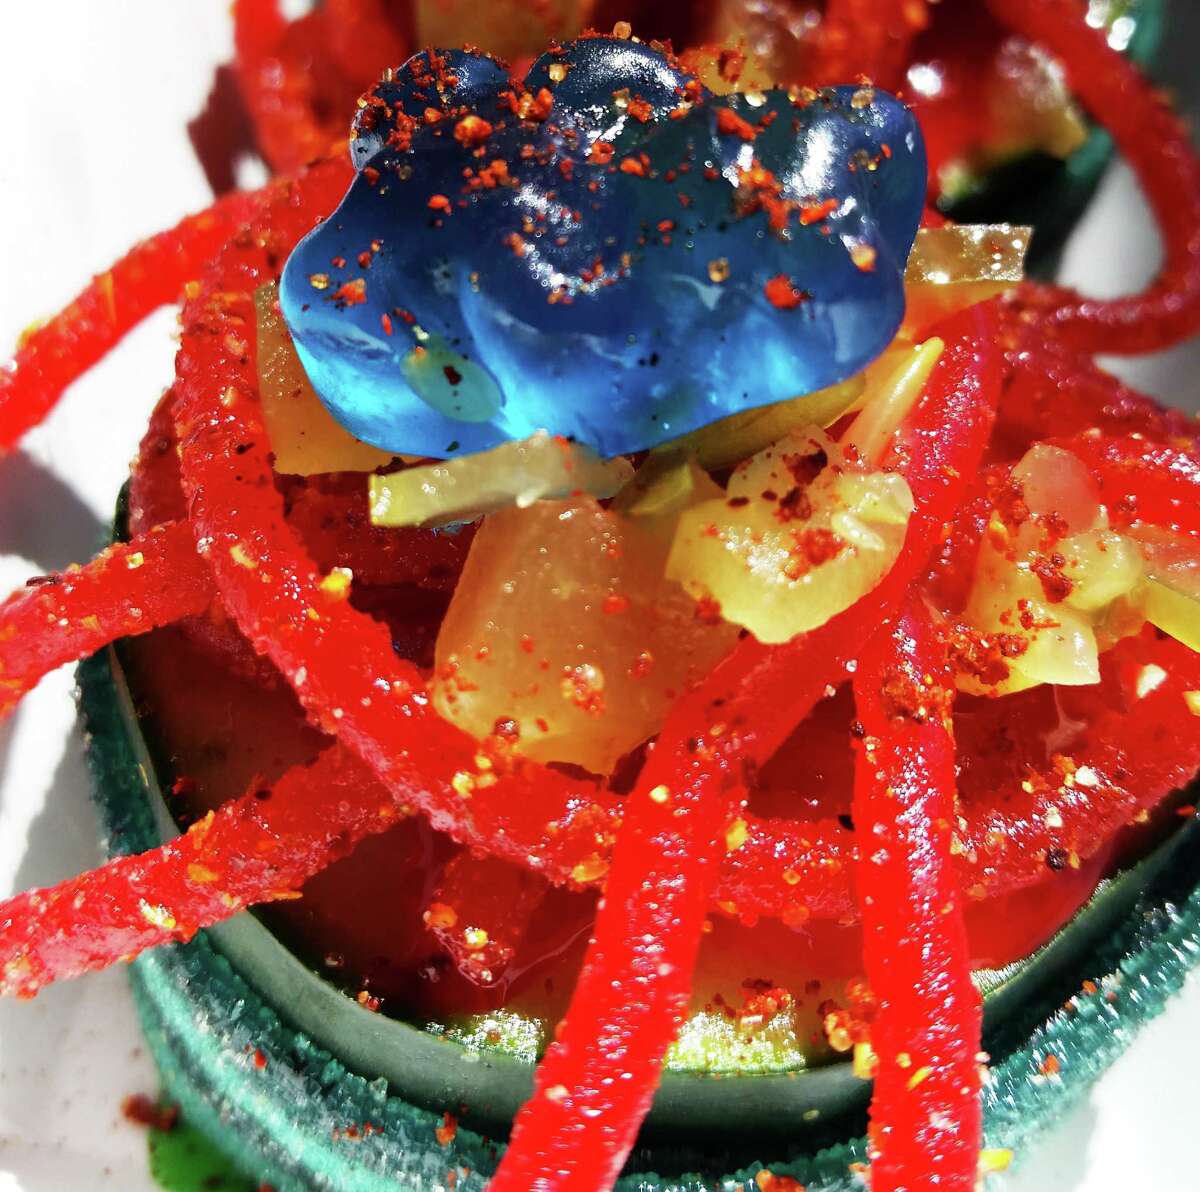 The Cucumber Sushi raspa from Chamoy City Limits is garnished with chopped pickled fruits, candy and chamoy sauce.